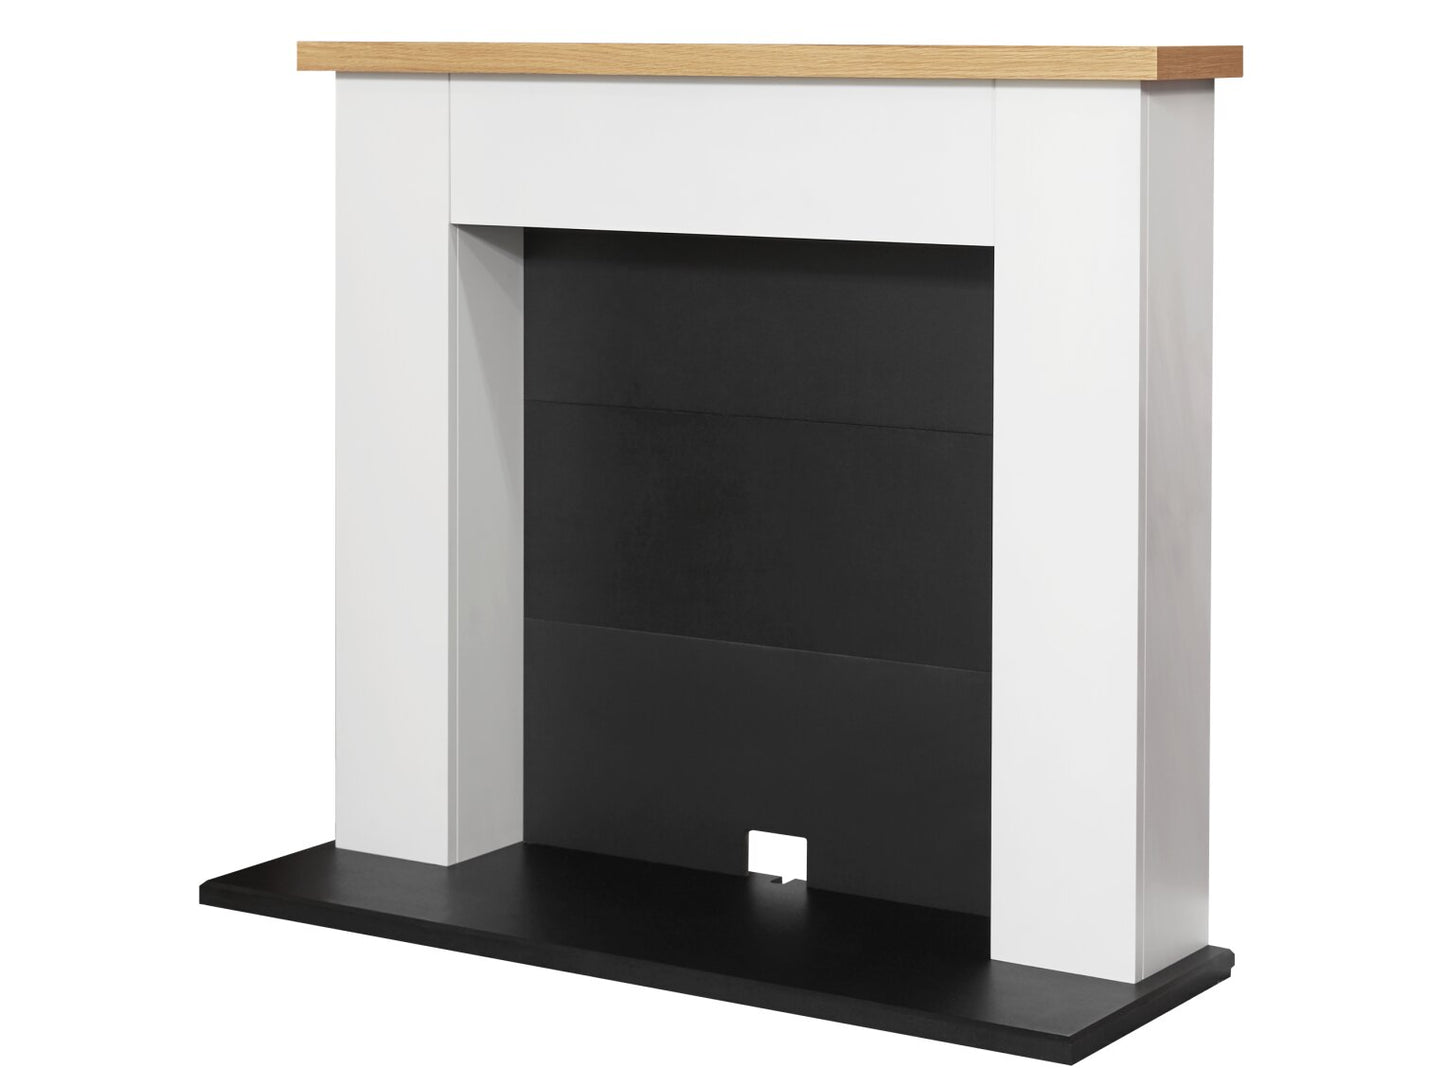 Adam Chester Electric Stove Fireplace in 39 Inch 22122 Pure White & Black